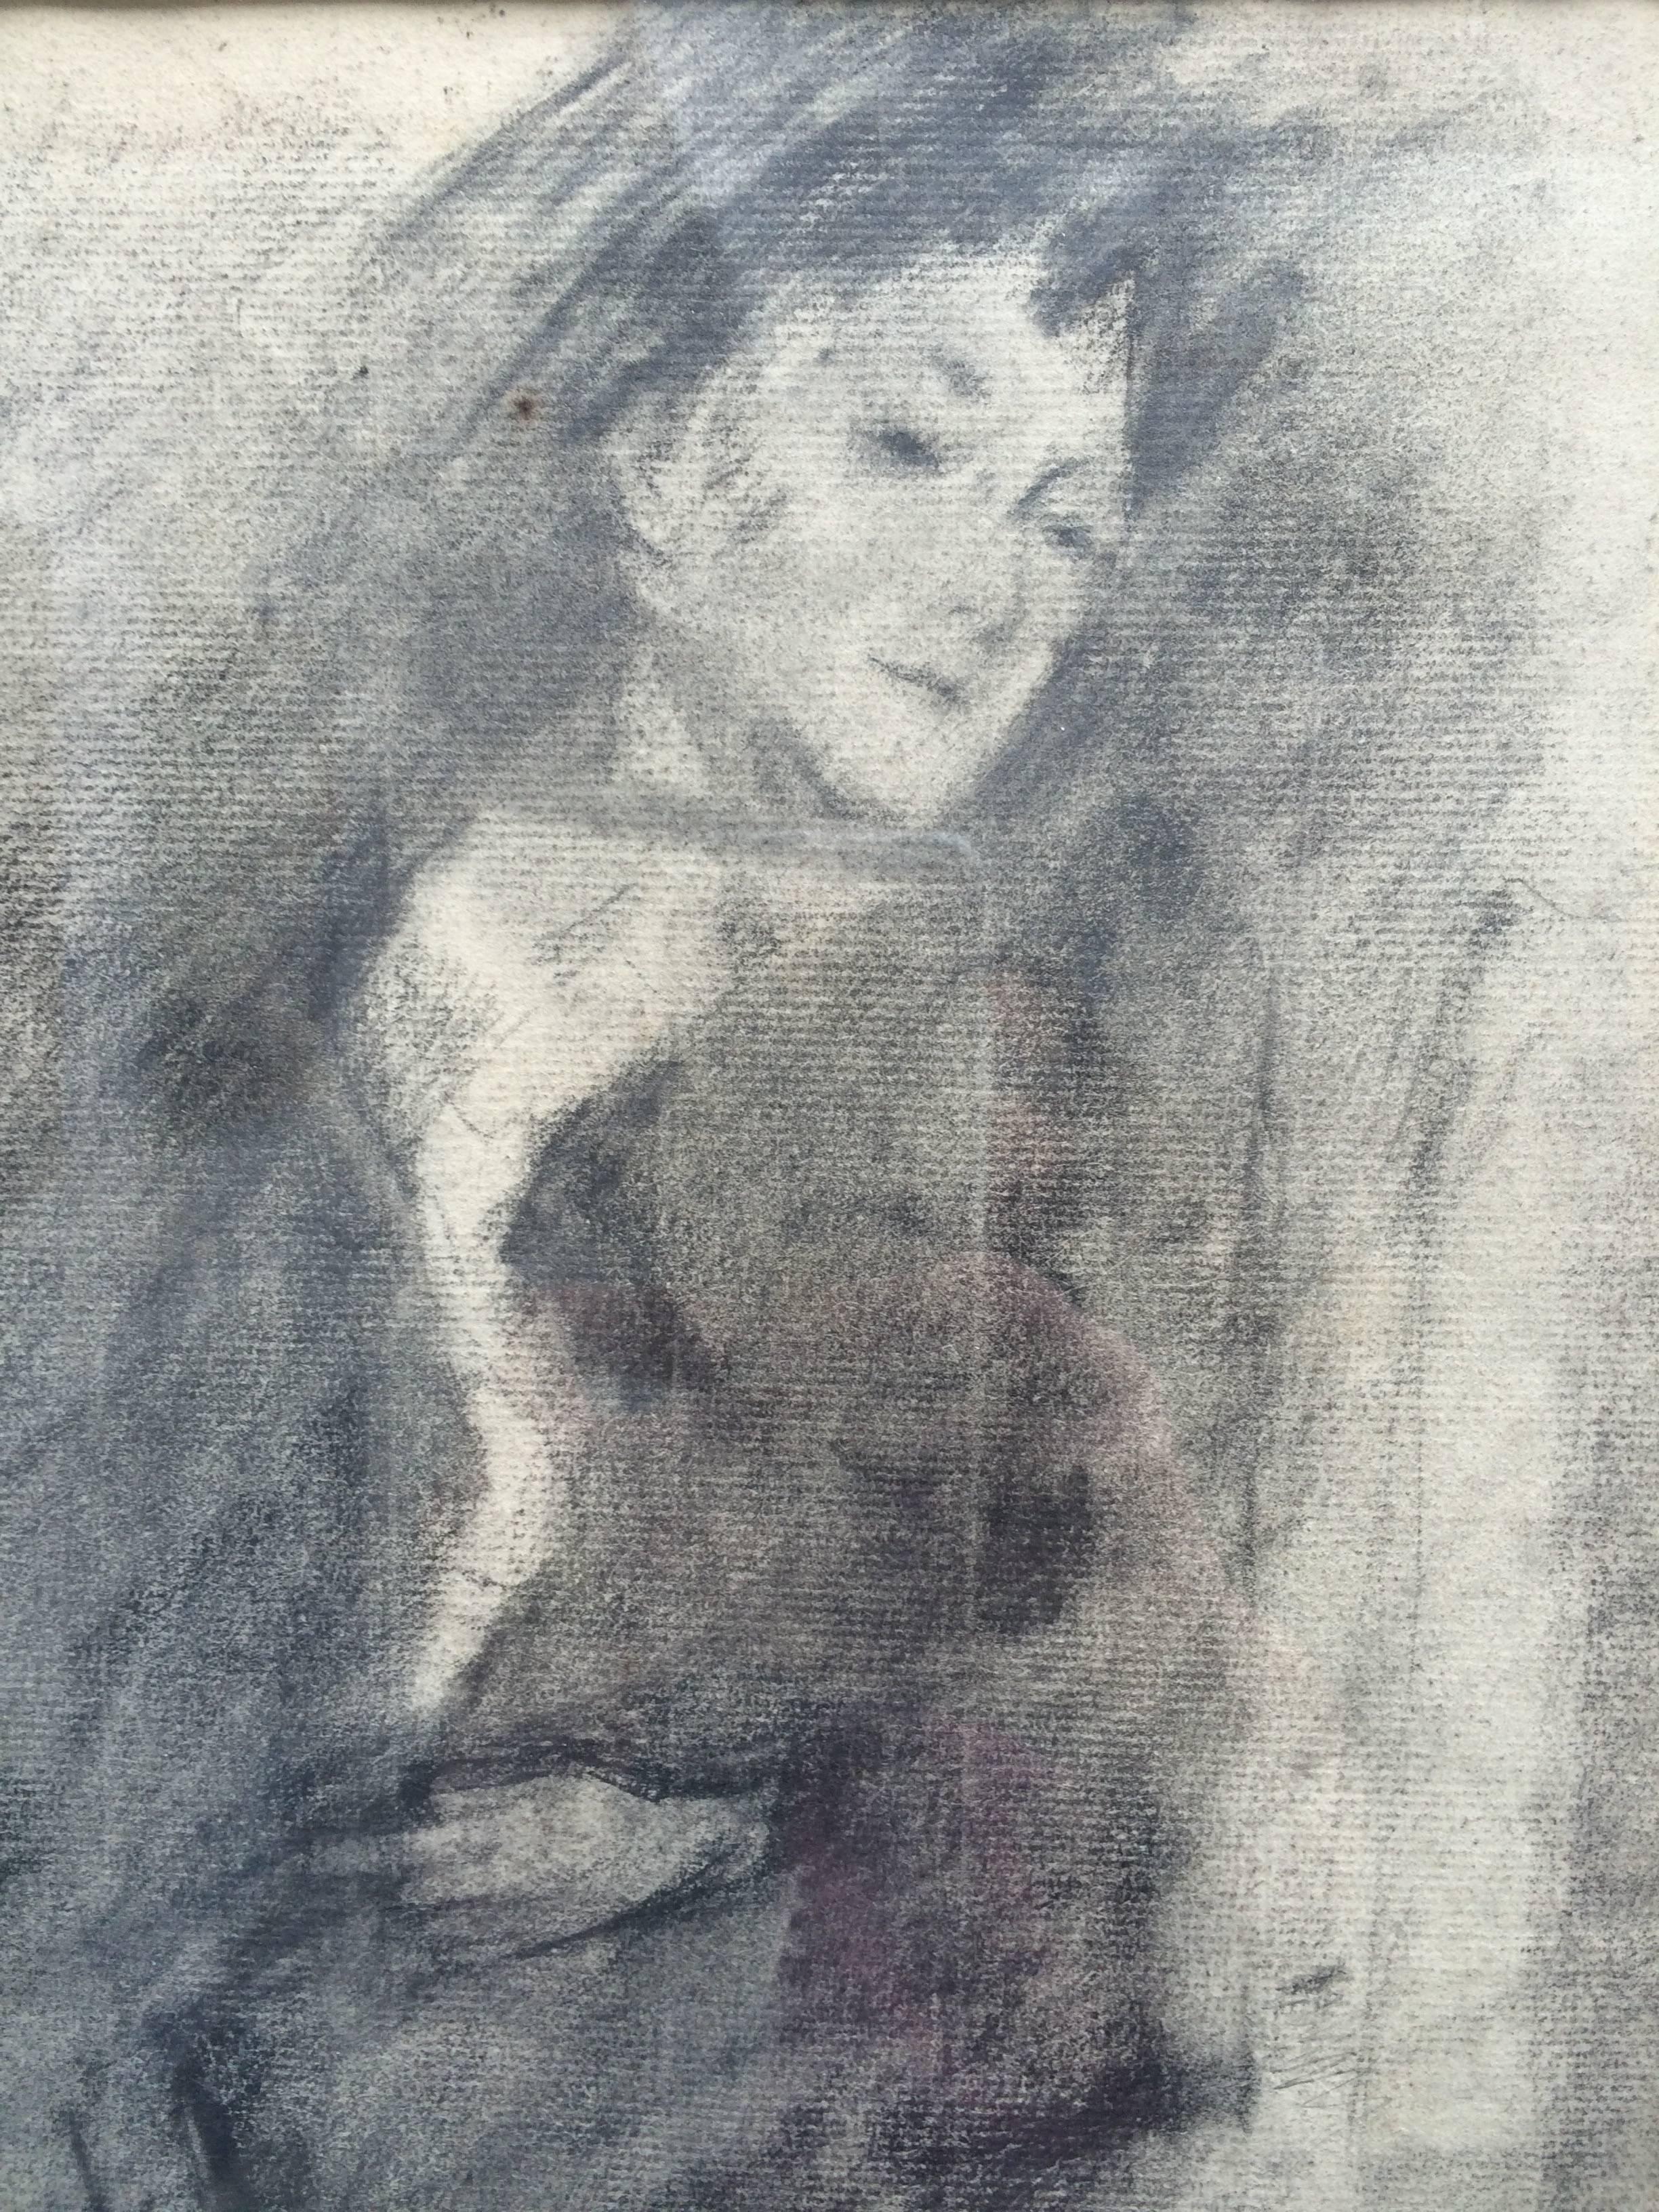 Early 20th Century French School Pencil Drawing of a Woman - Brown Figurative Art by Unknown